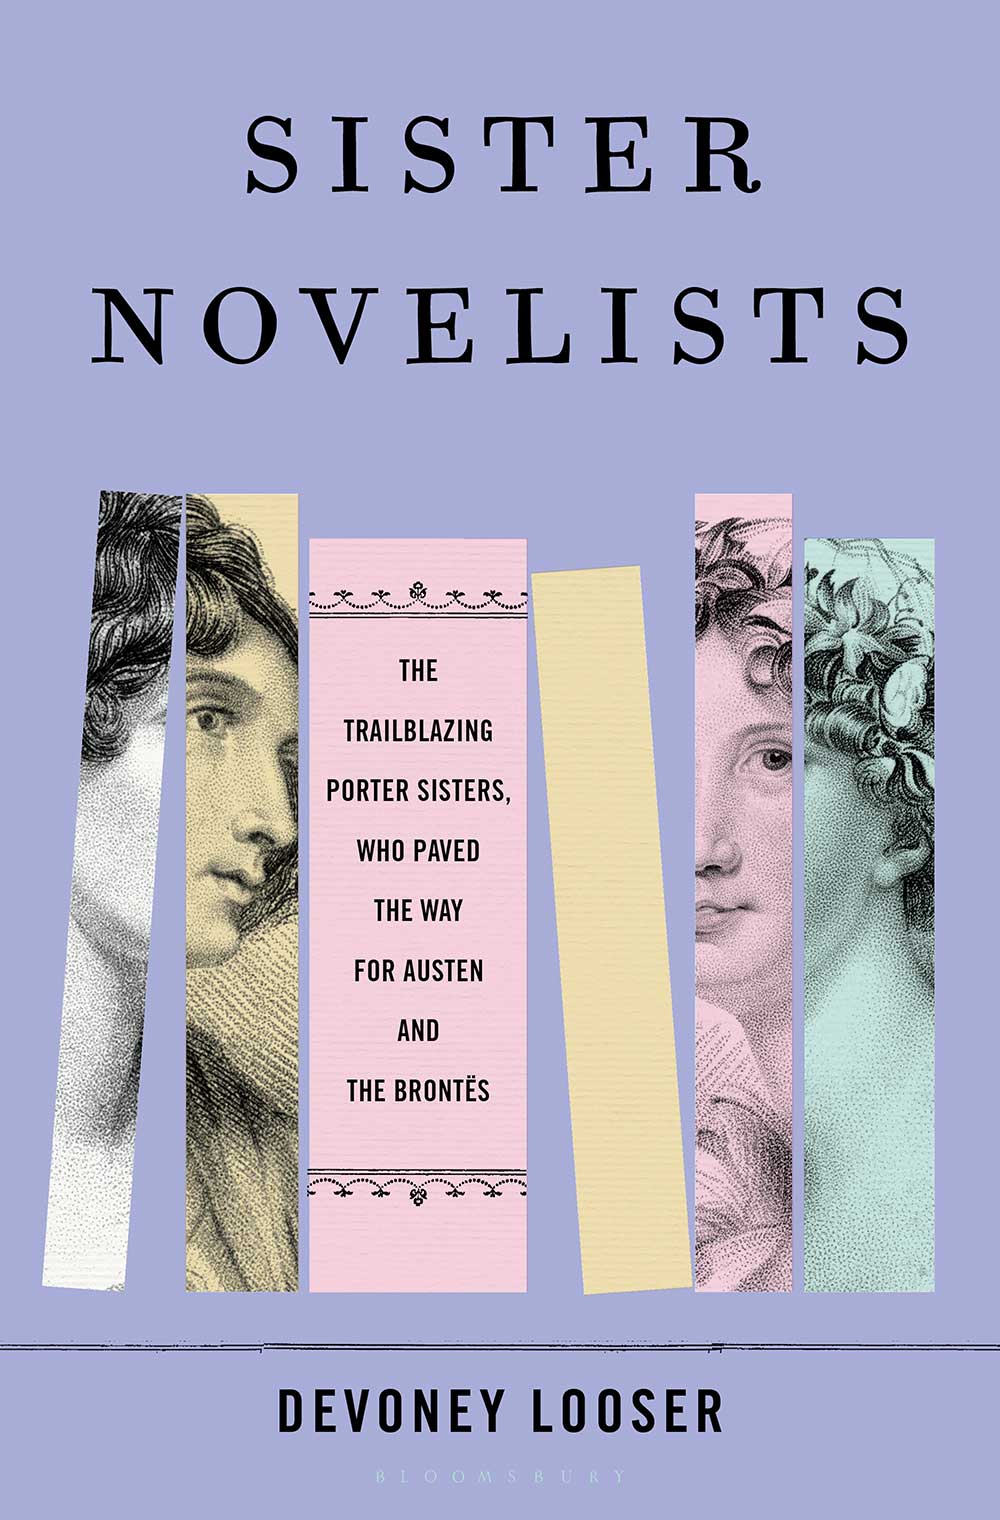 Cover of Devoney Looser’s Sister Novelists: The Trailblazing Porter Sisters, Who Paved the Way for Austen and the Brontës